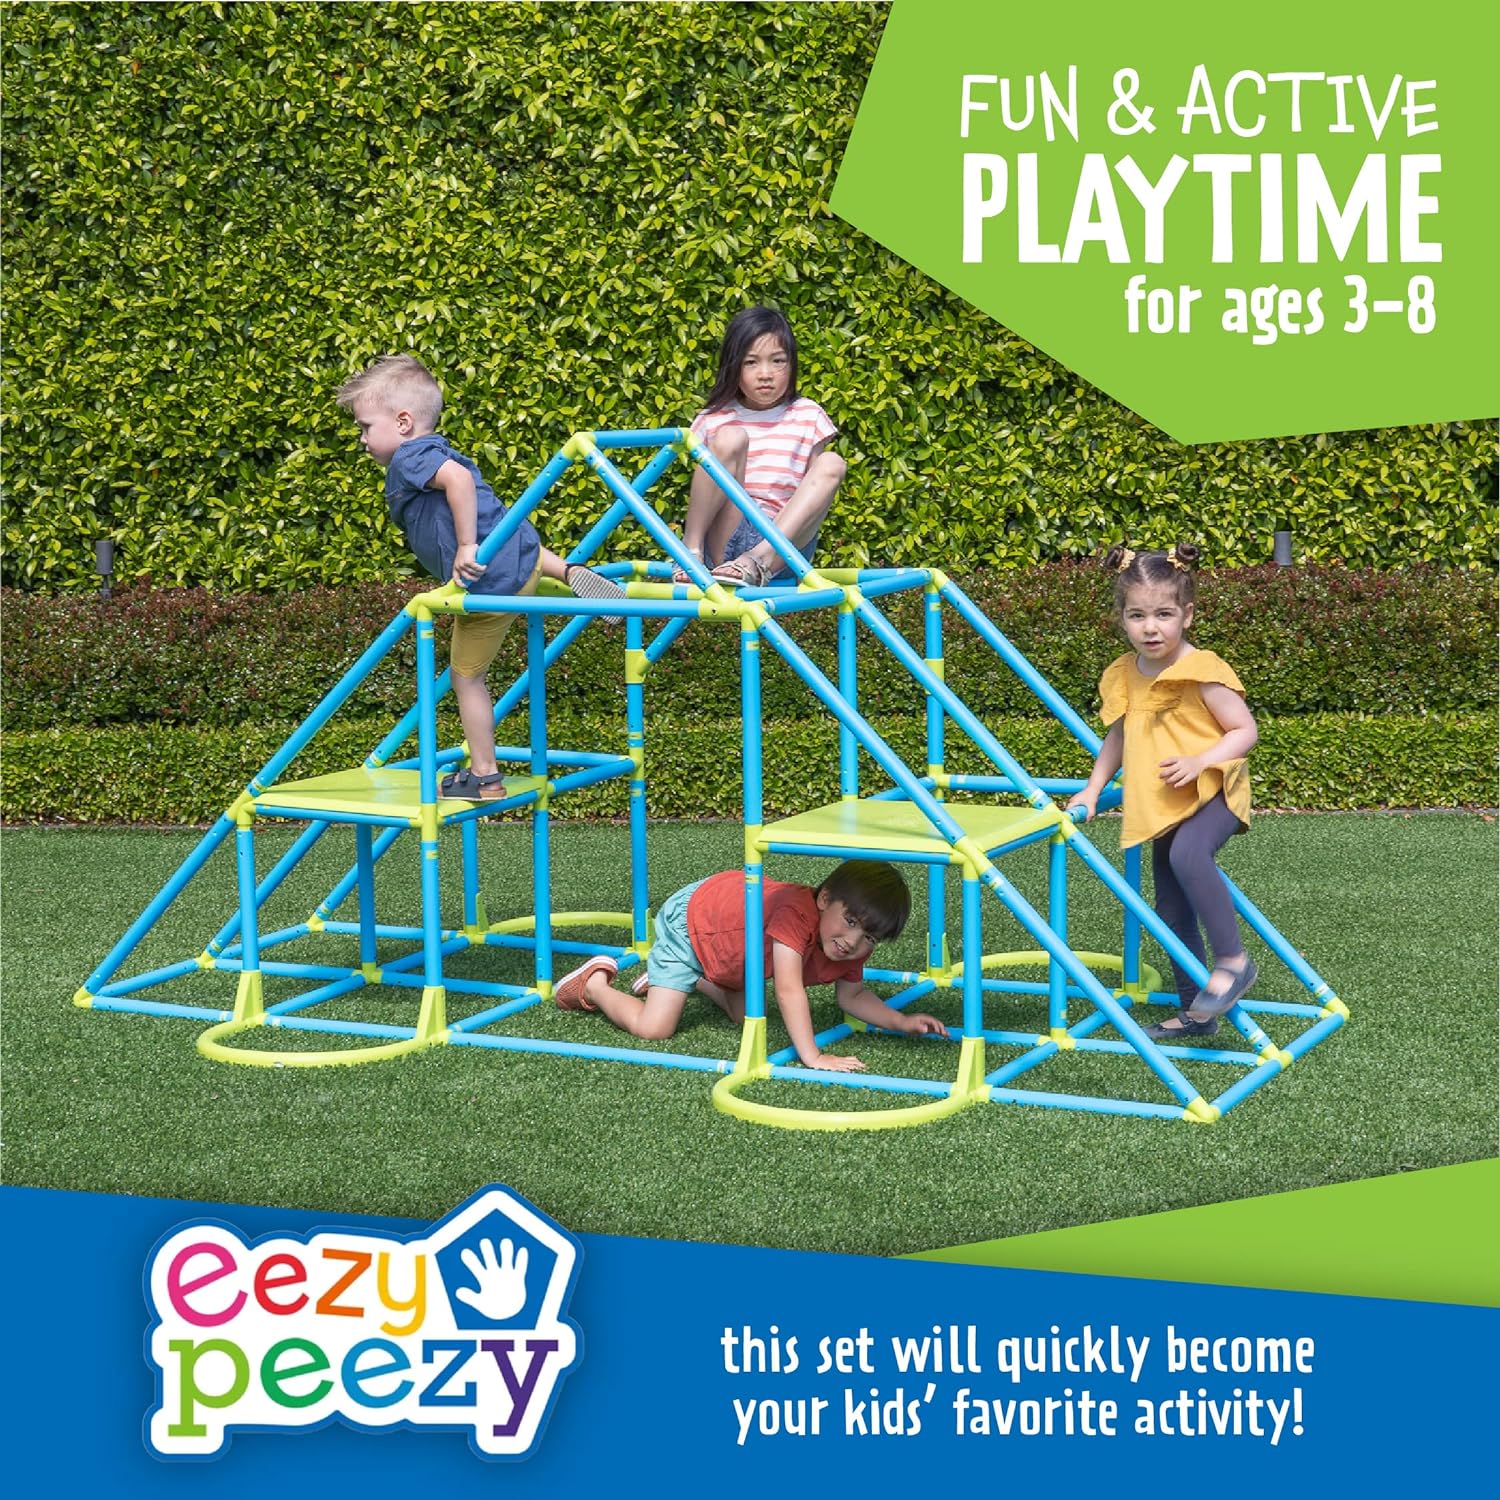 Eezy Peezy Monkey Bars Climbing Tower - Active Indoor/Outdoor Fun for Kids Jungle Gym Ages 3 to 8 Years Old